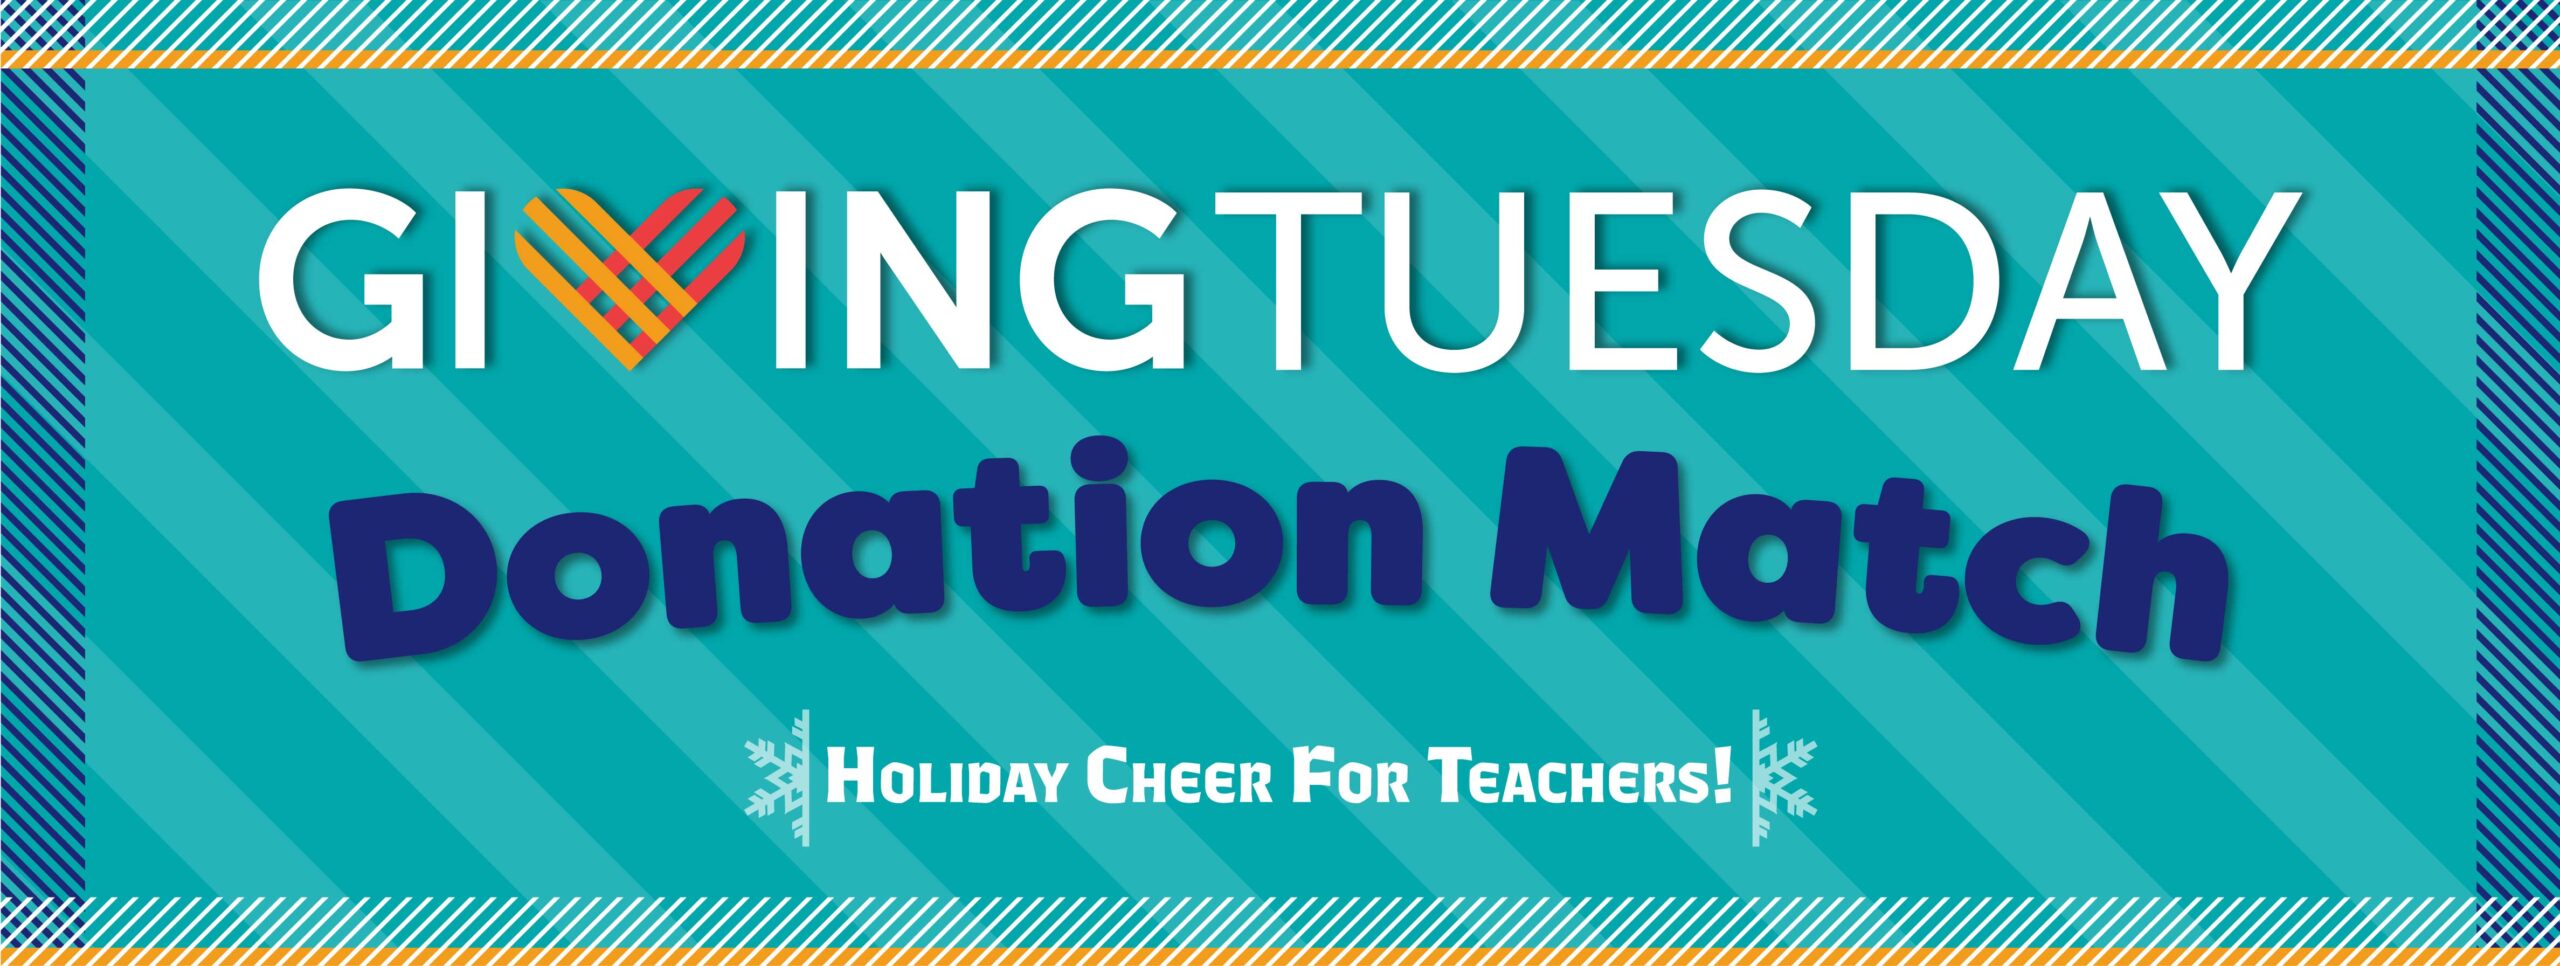 Giving Tuesday Donation Match. Holiday cheer for teachers.